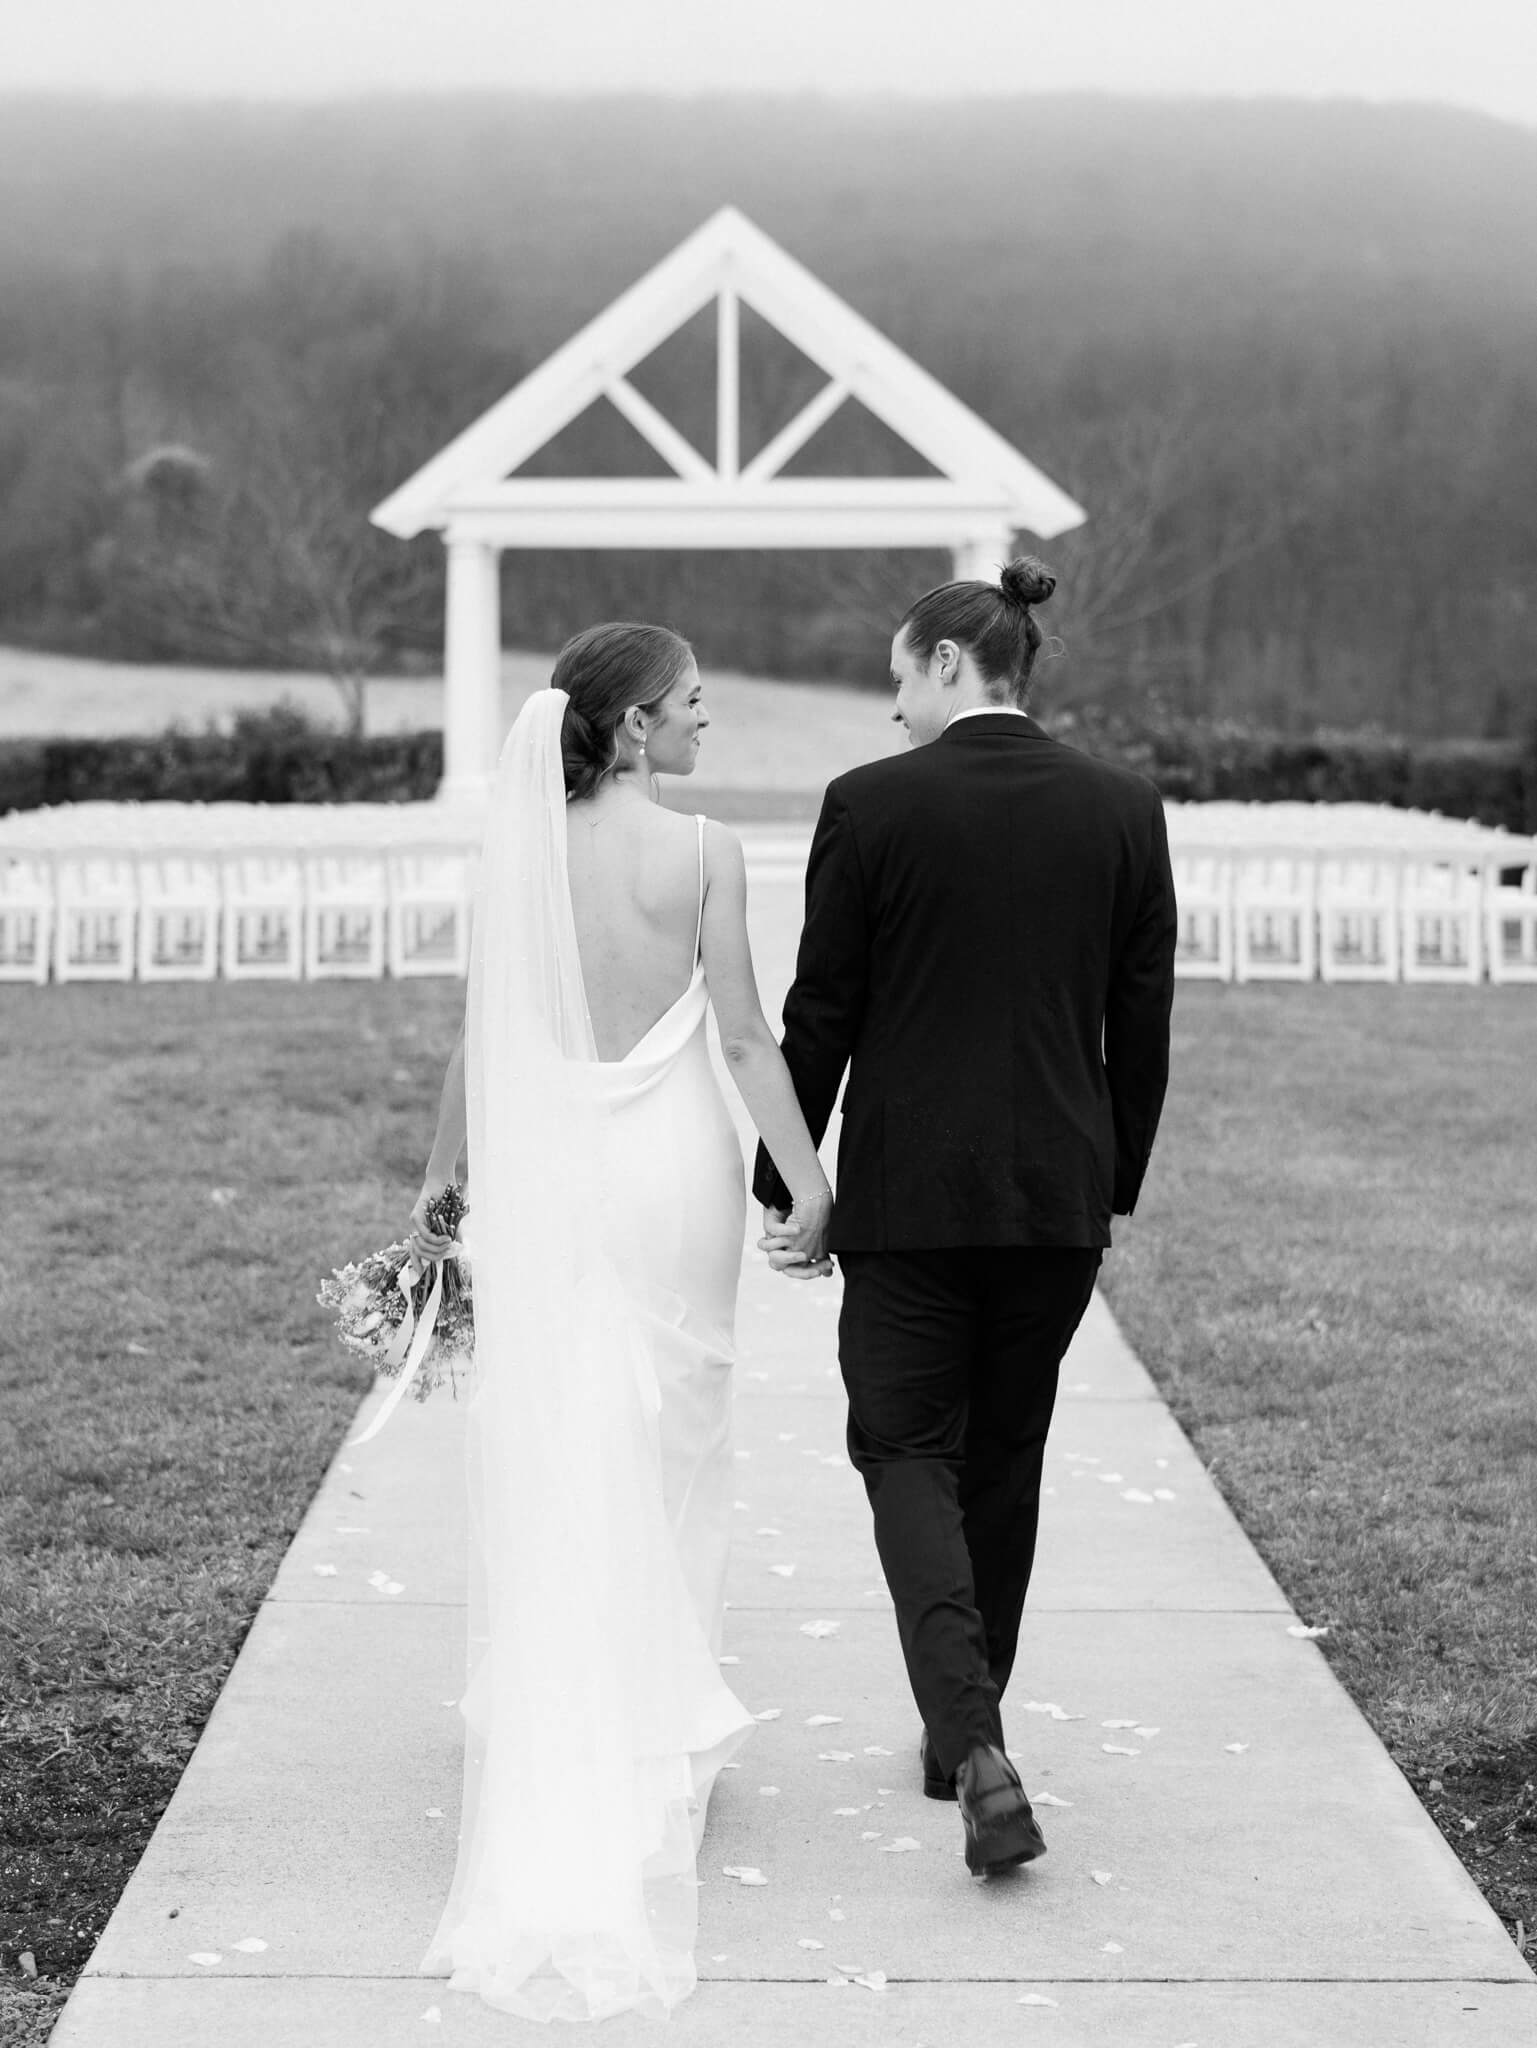 A black and white of a bride and groom walking hand in hand away towards their ceremony space while looking at each other.